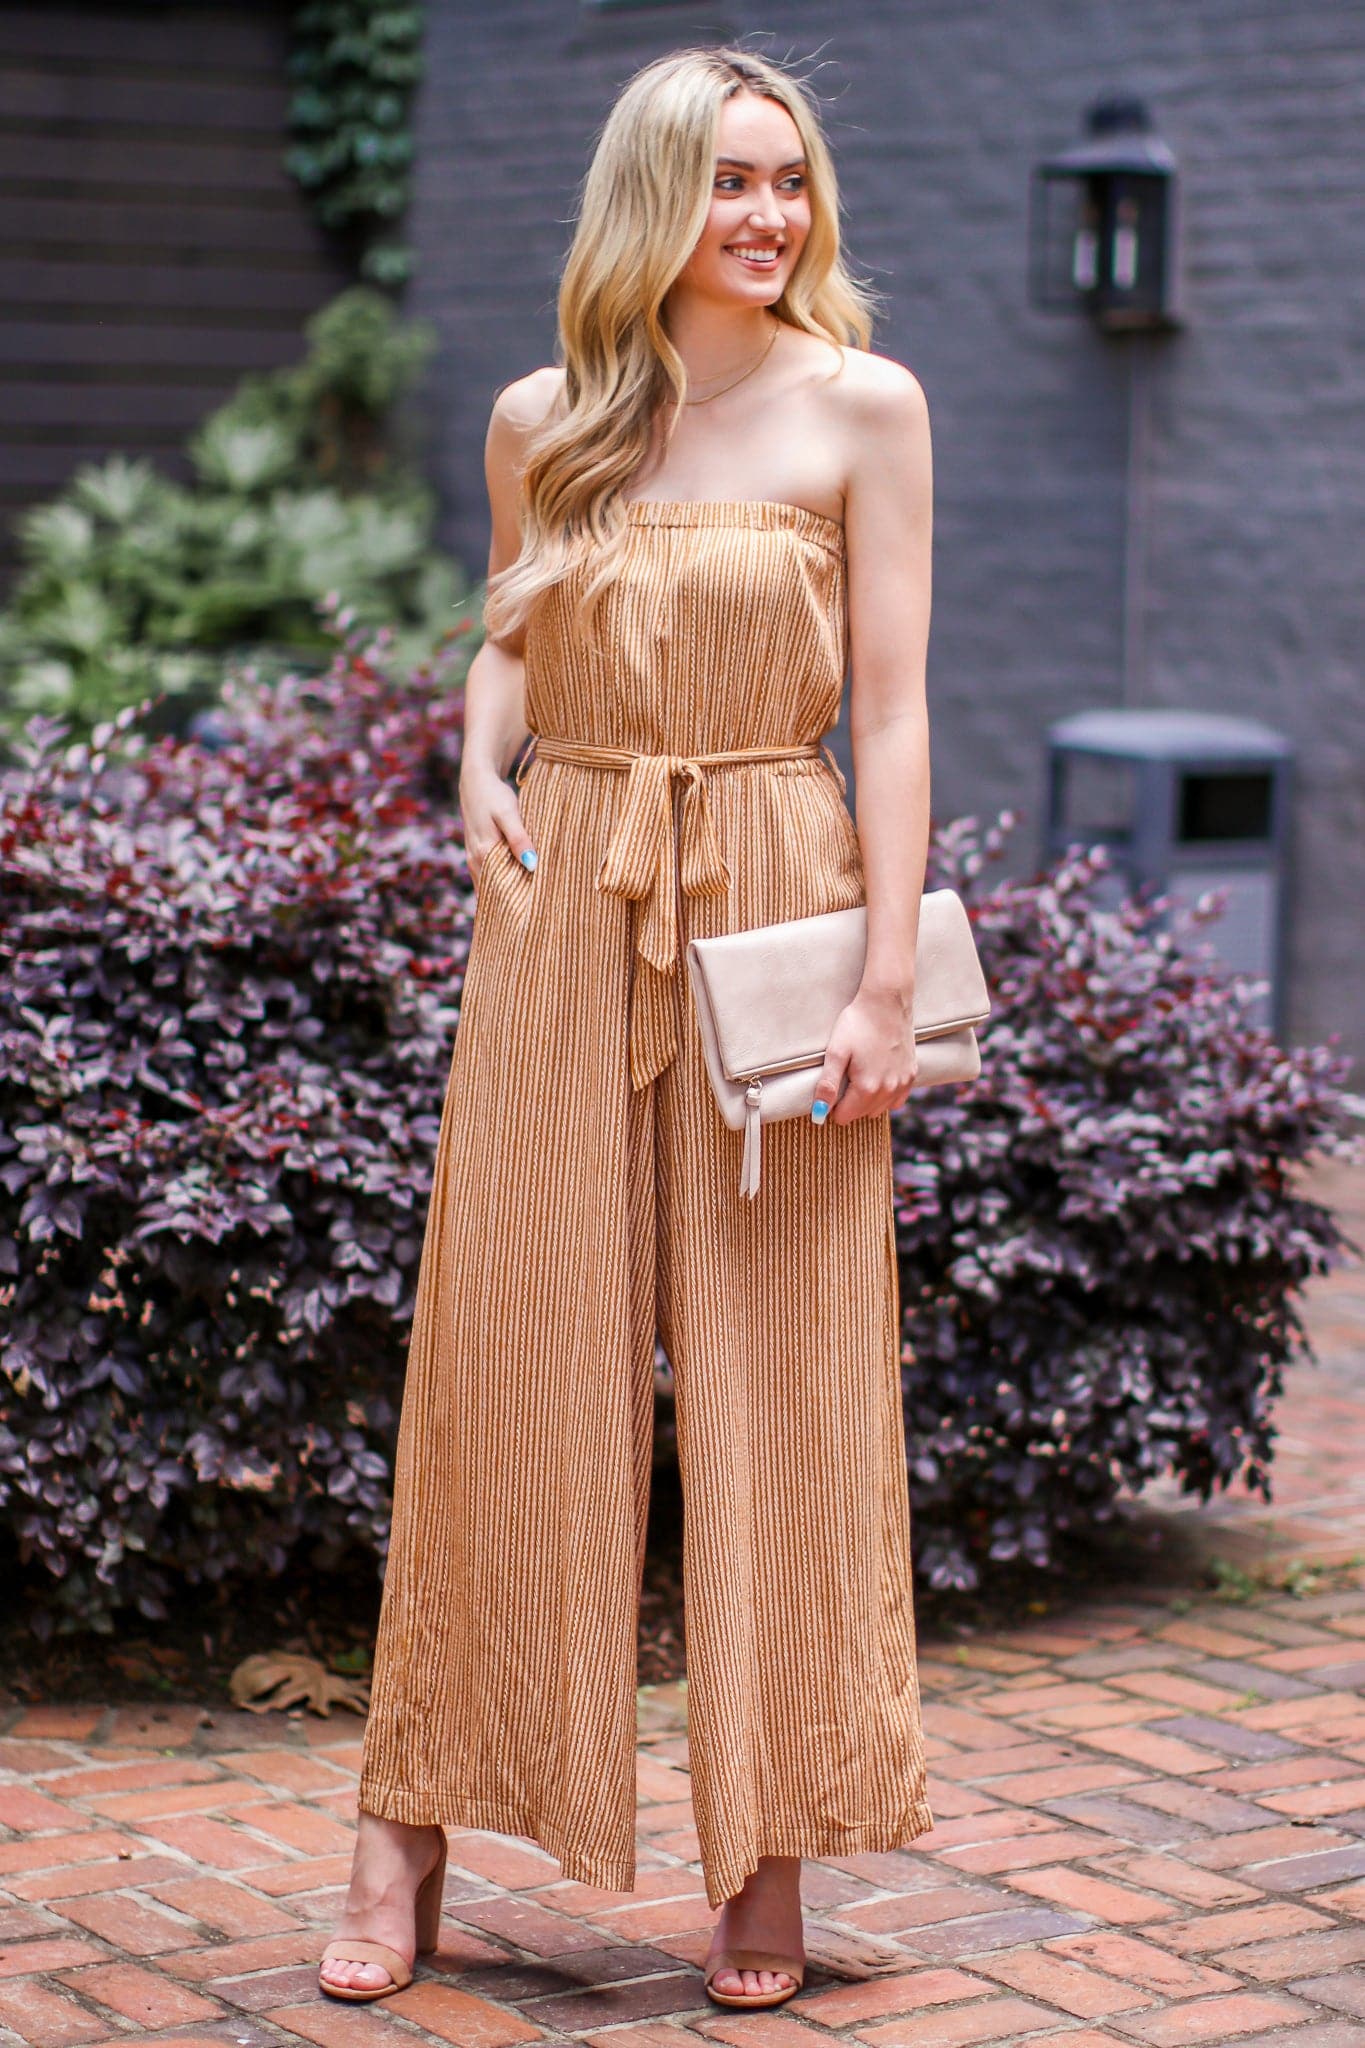  Find Me Here Striped Wide Leg Jumpsuit - FINAL SALE - Madison and Mallory